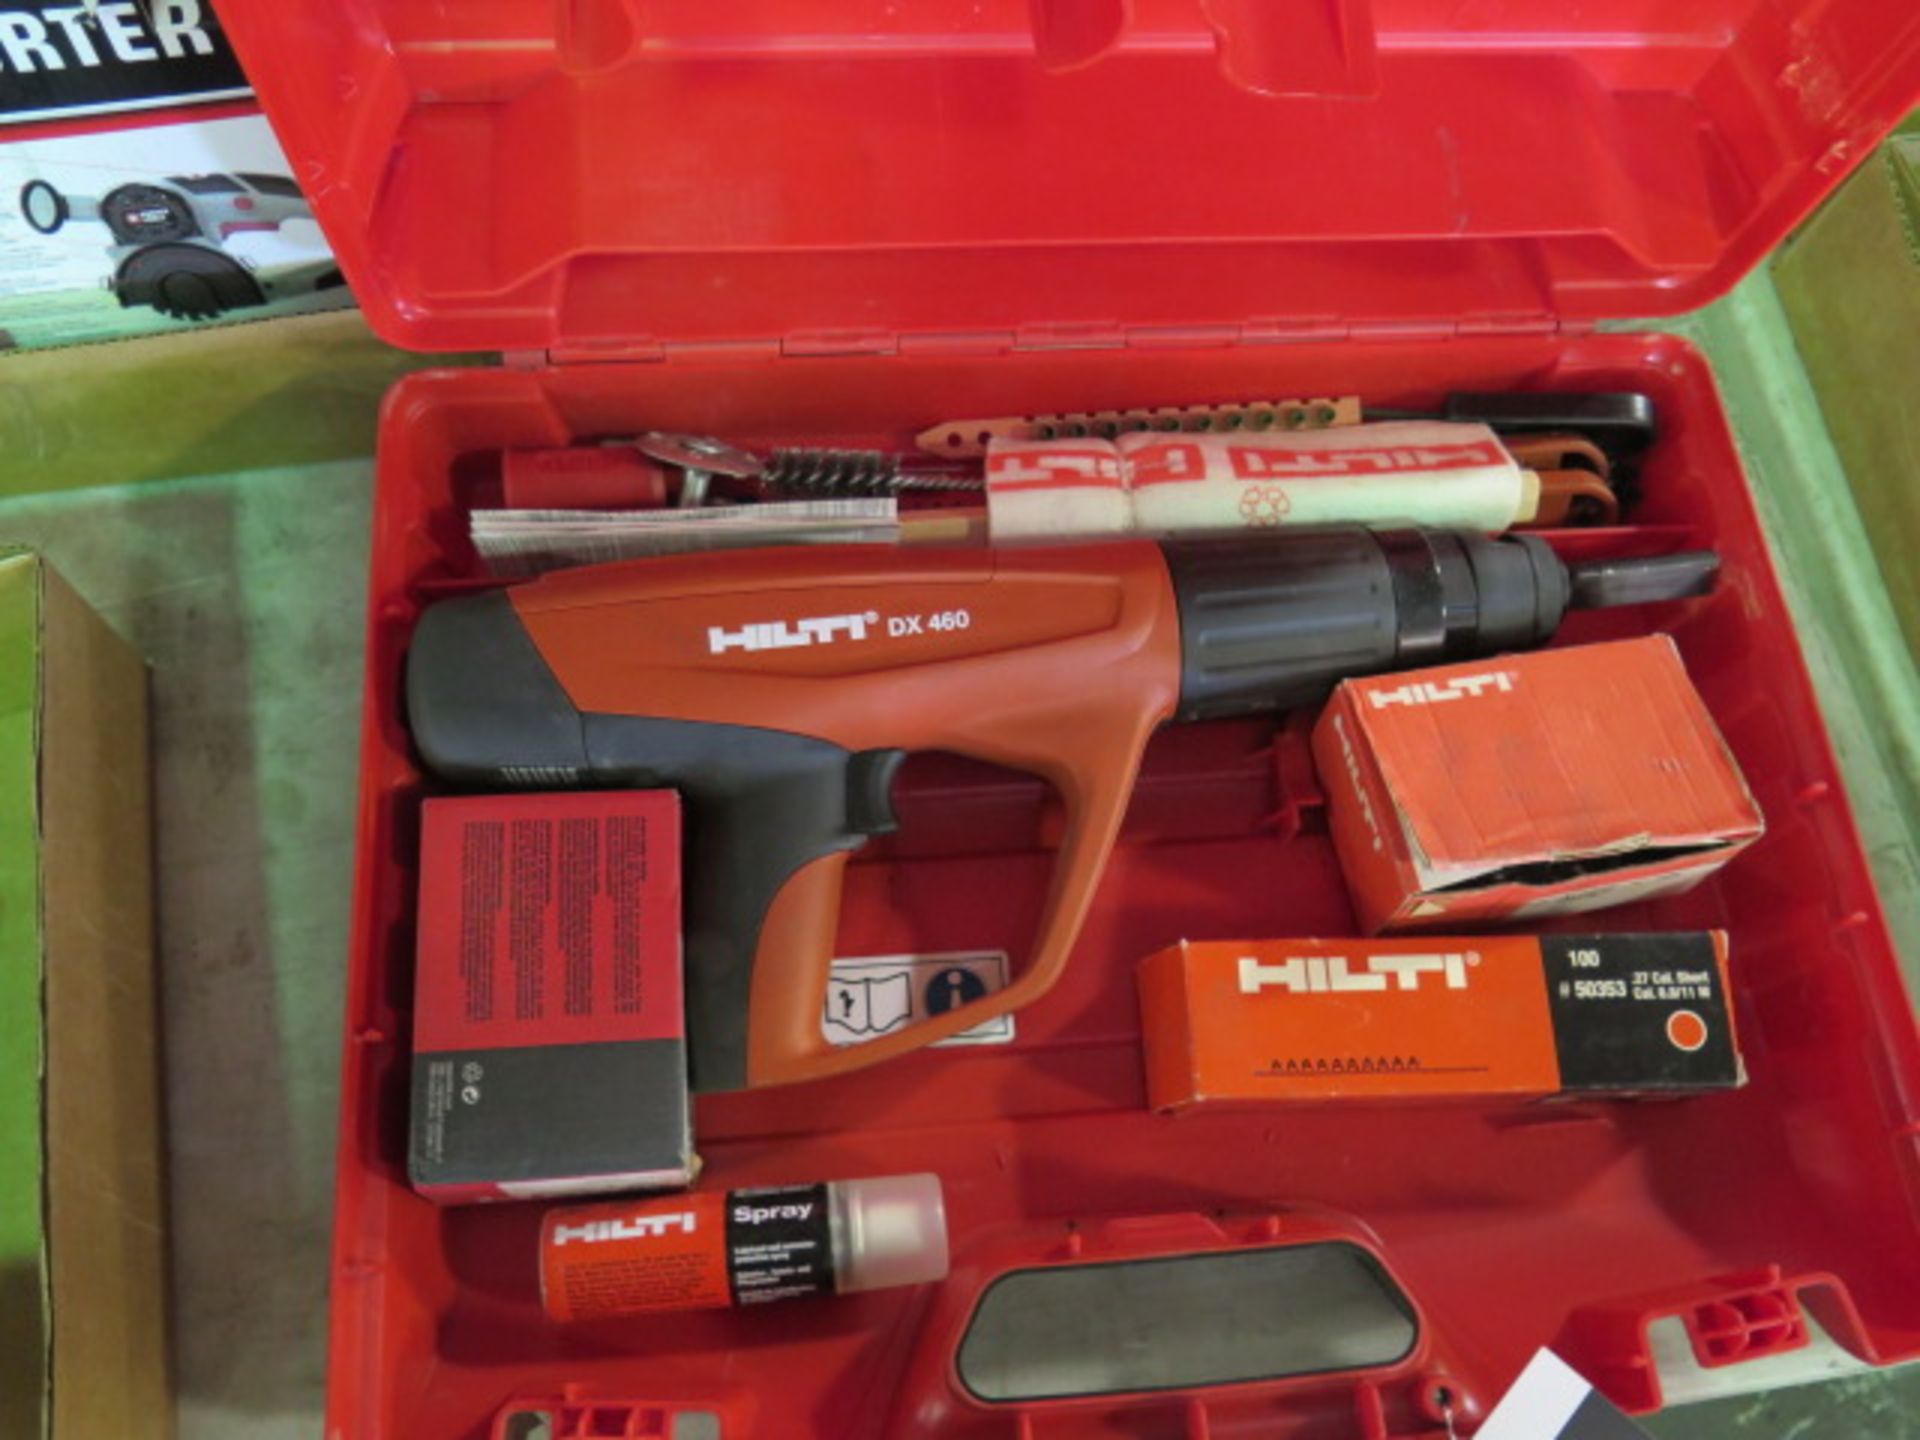 Hilti DX460 Powder Shot Tool (SOLD AS -IS - NO WARANTY) - Image 2 of 6